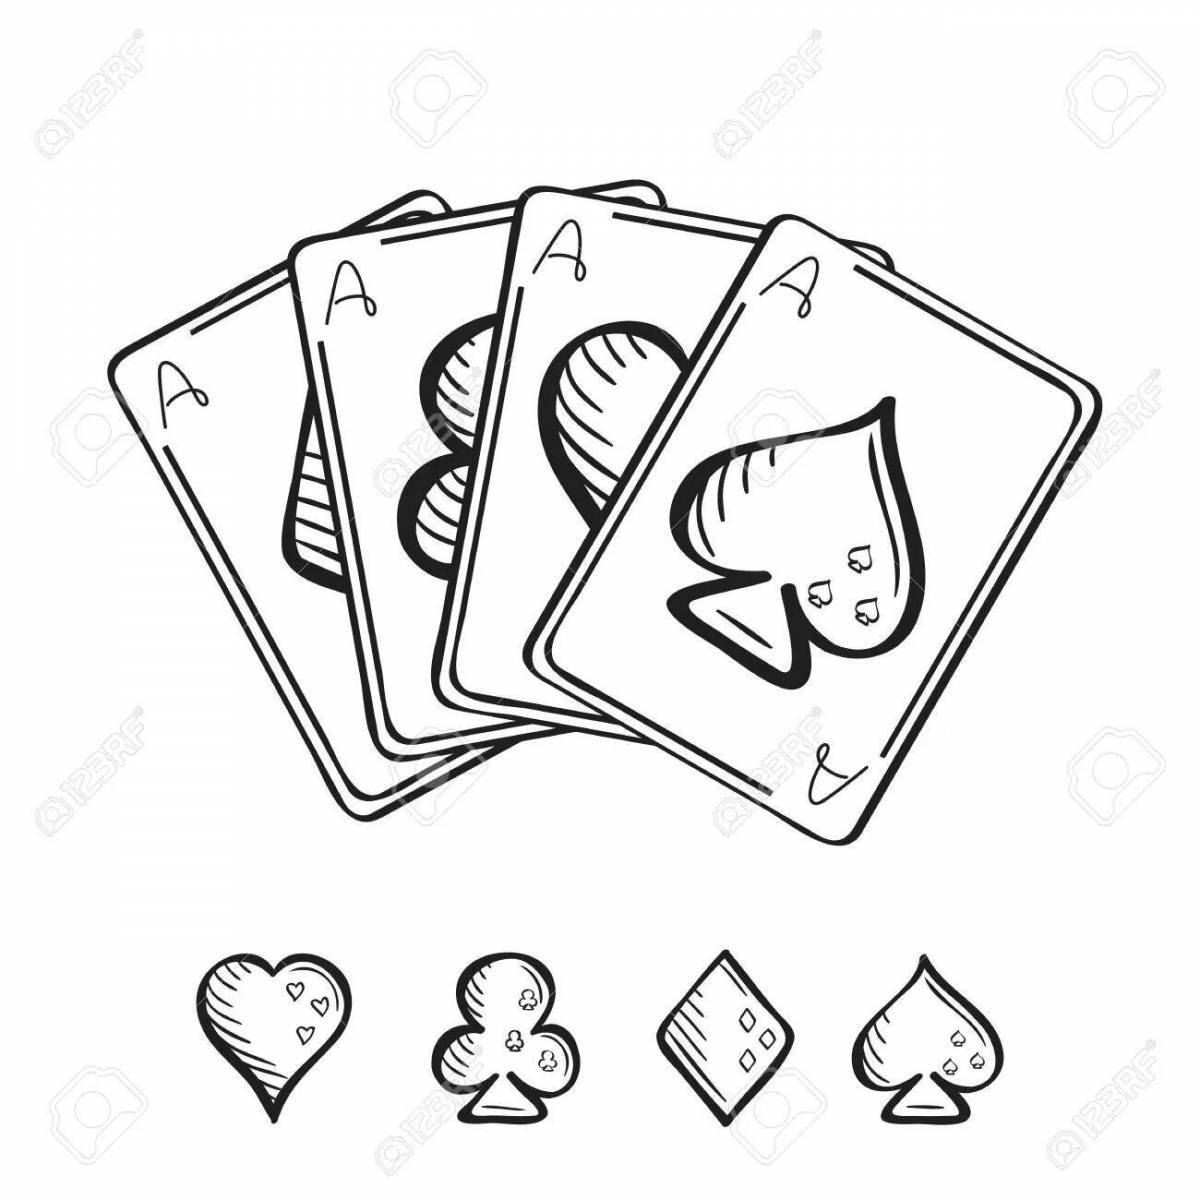 Playing cards #5